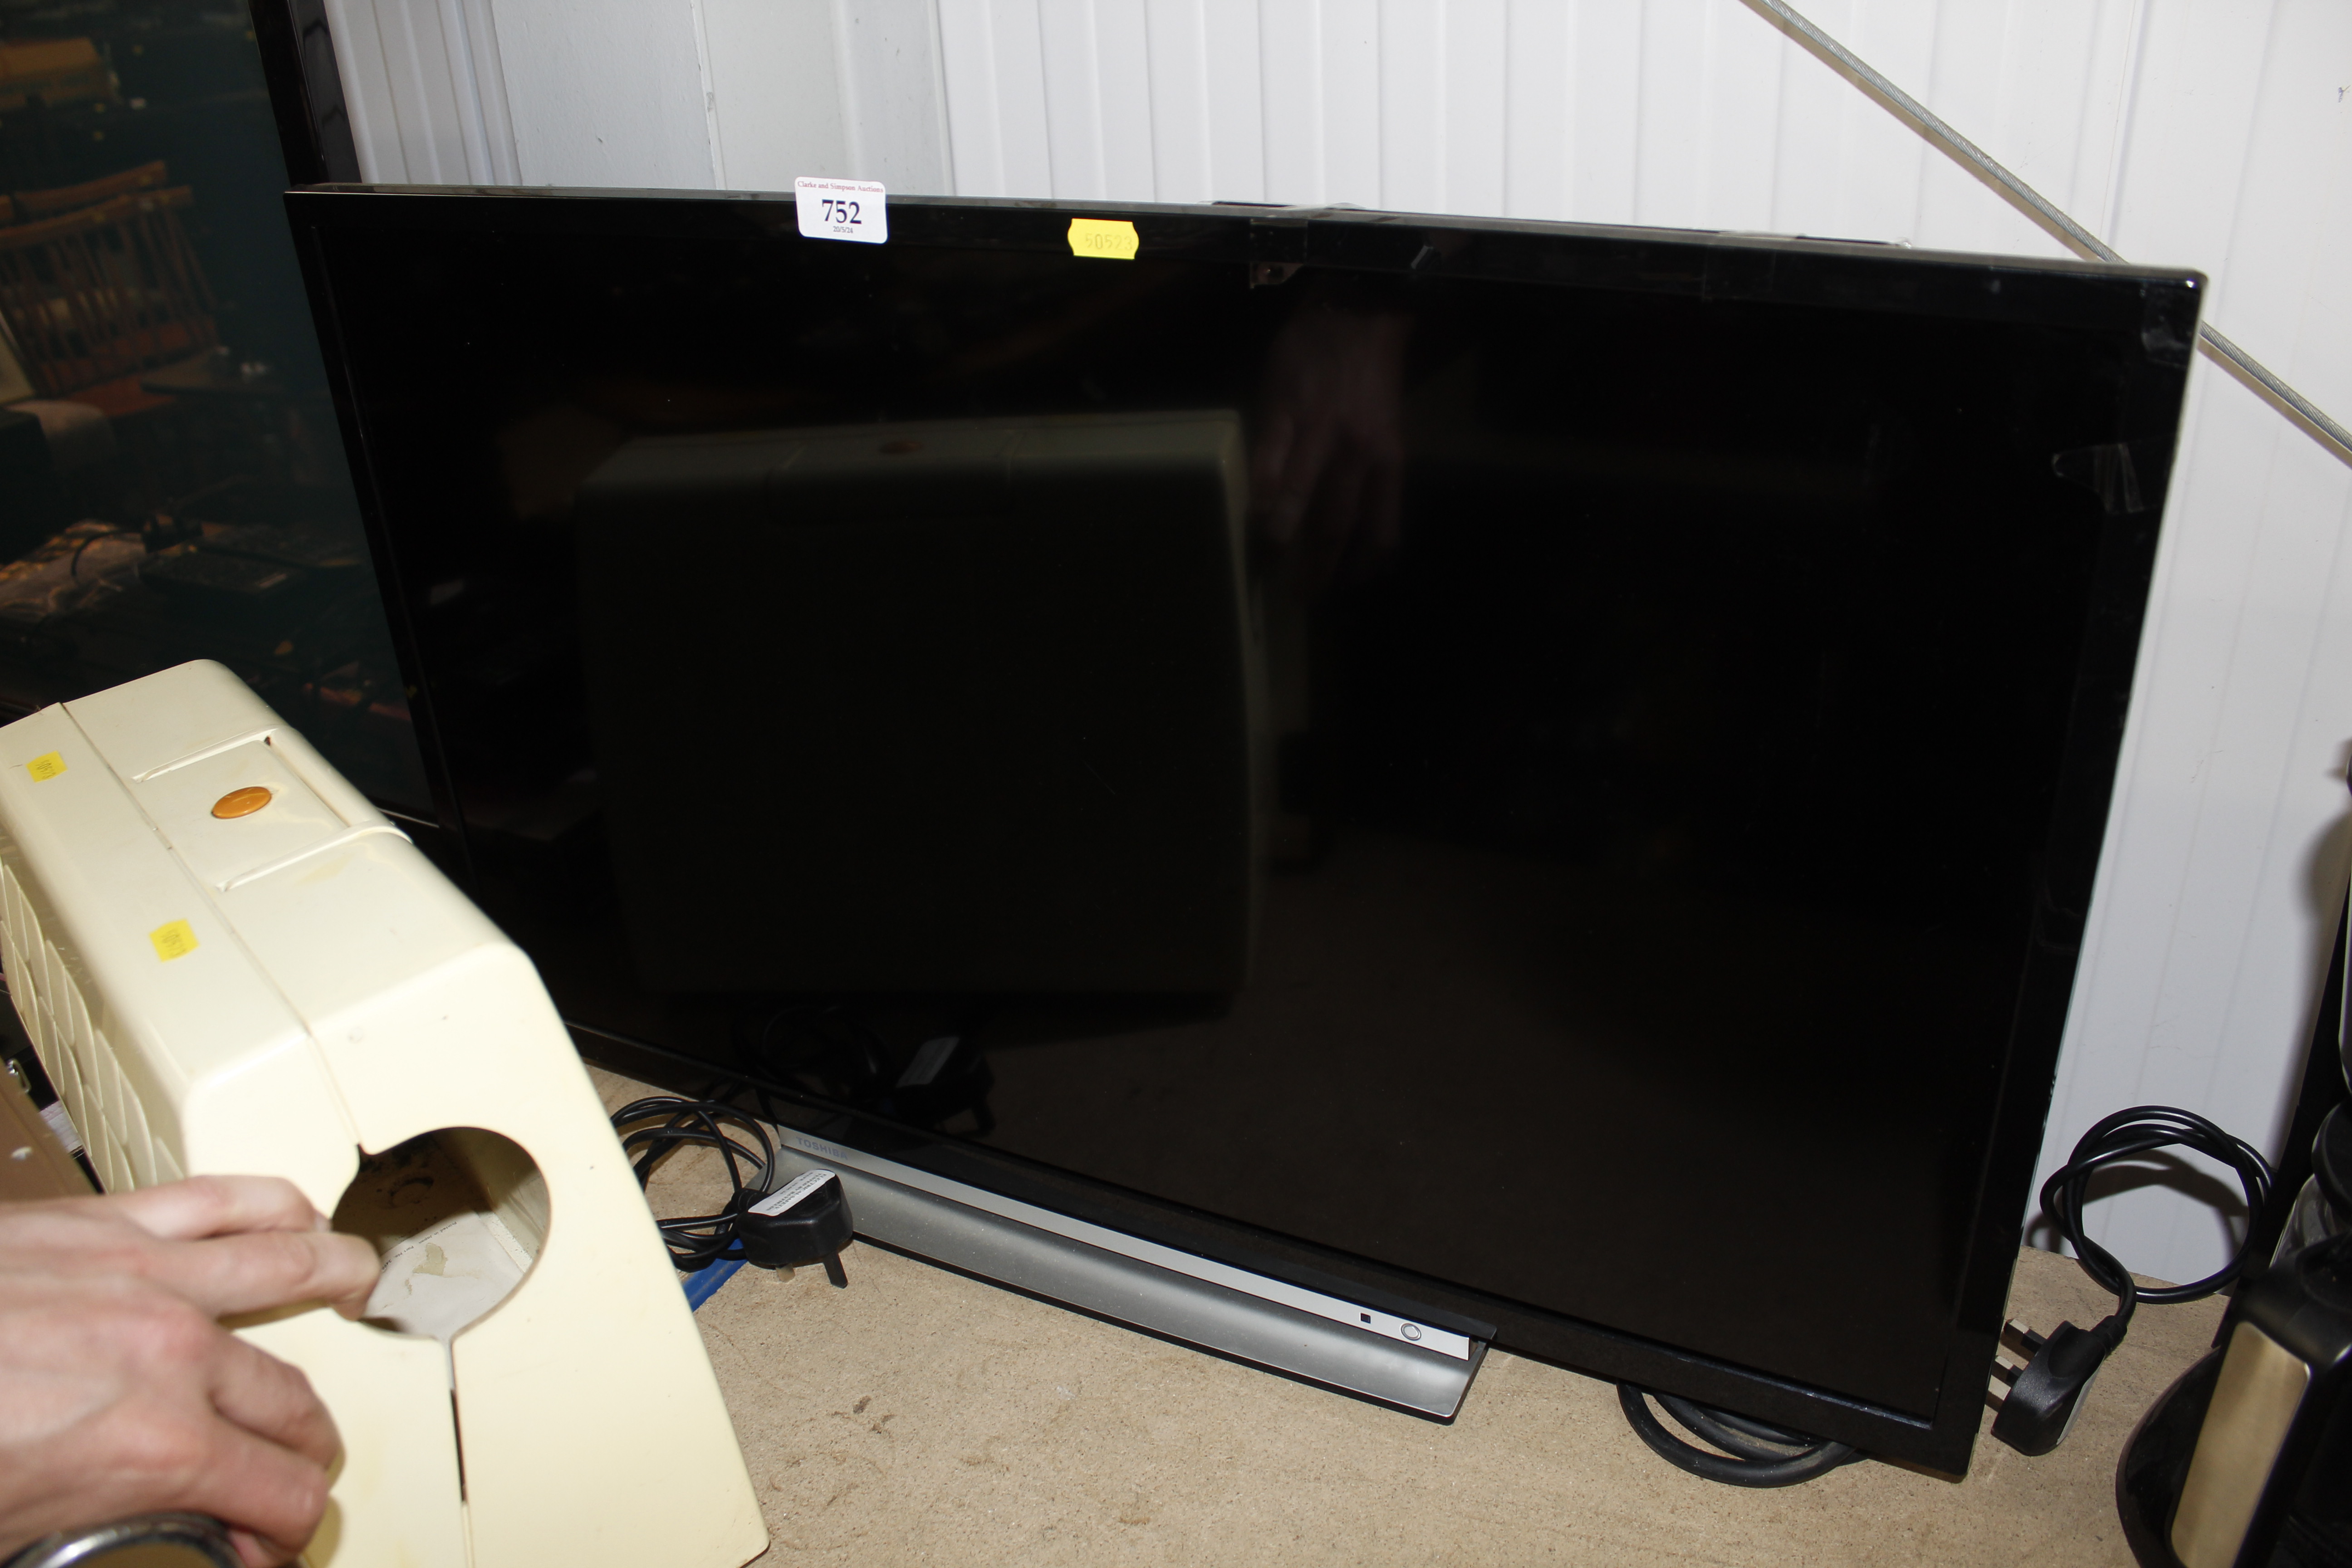 A Toshiba television with remote control